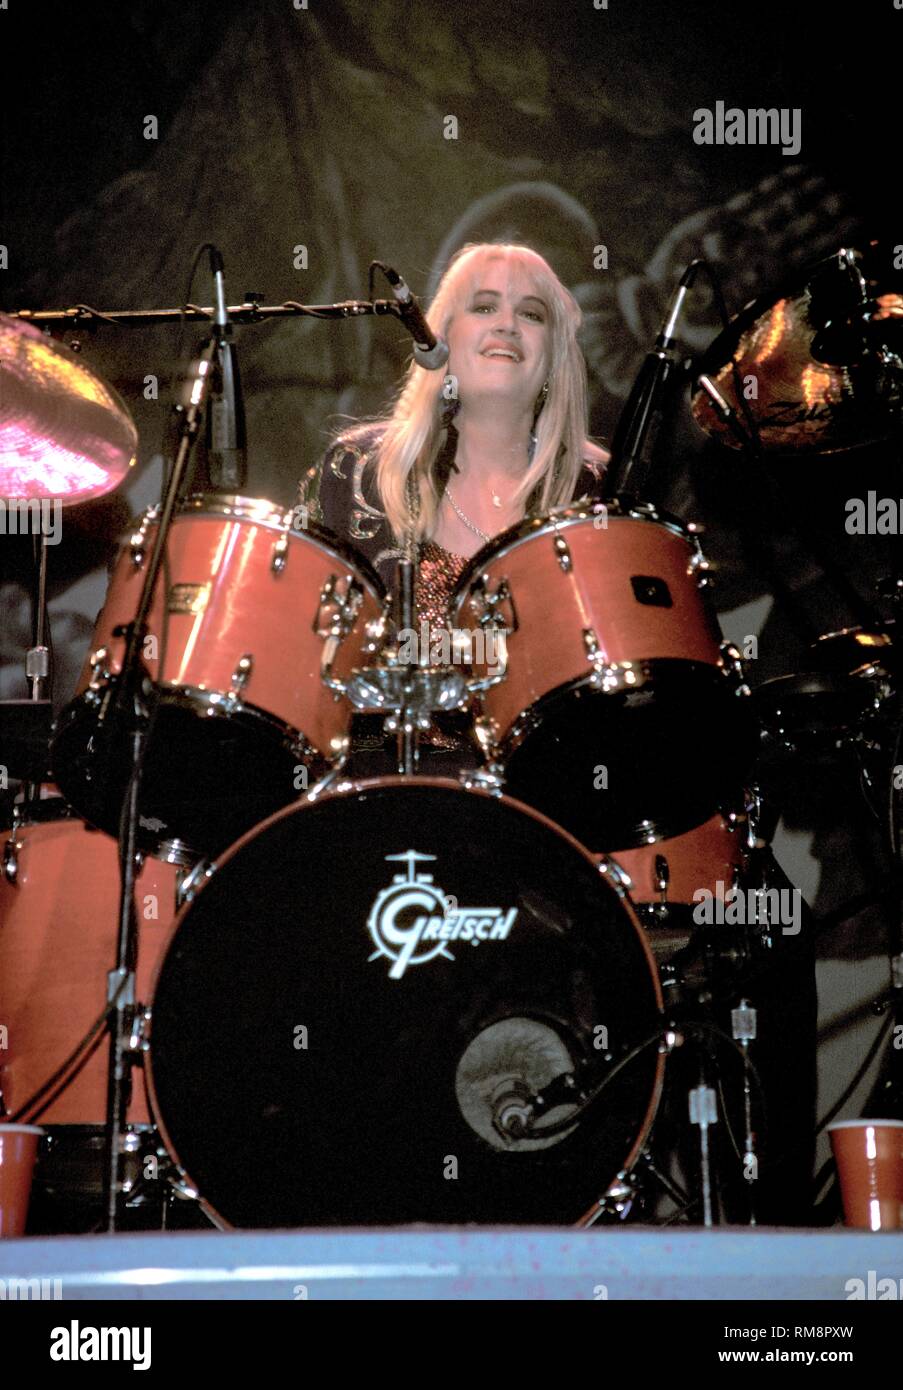 Bangles drummer Debbi Peterson is shown performing onstage. Stock Photo